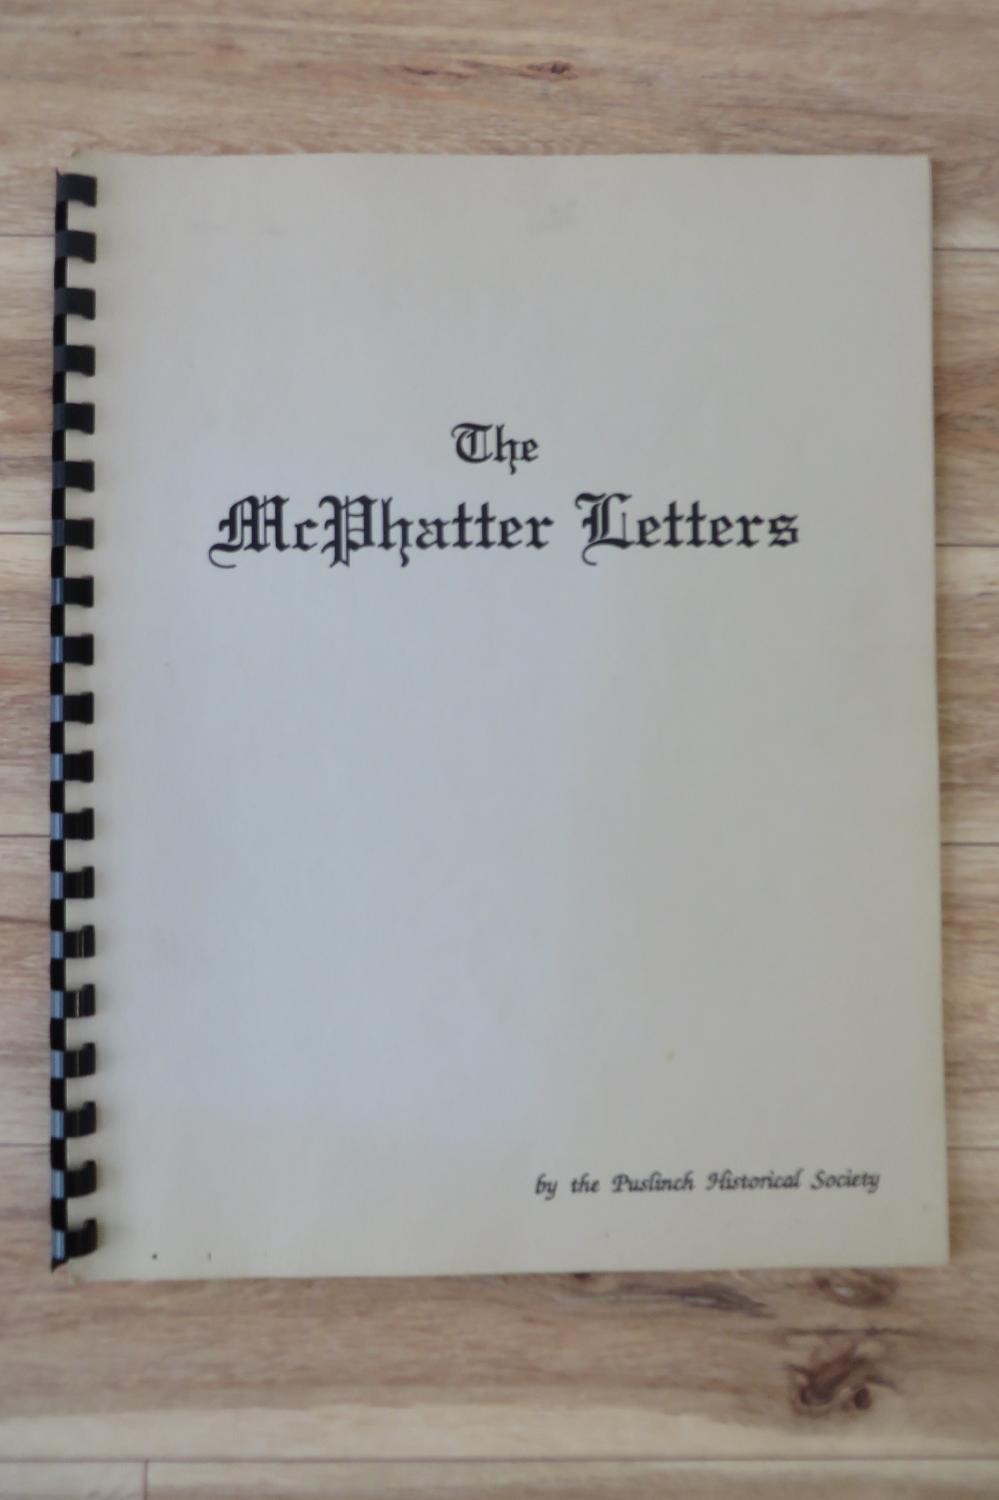 The McPhatter Letters